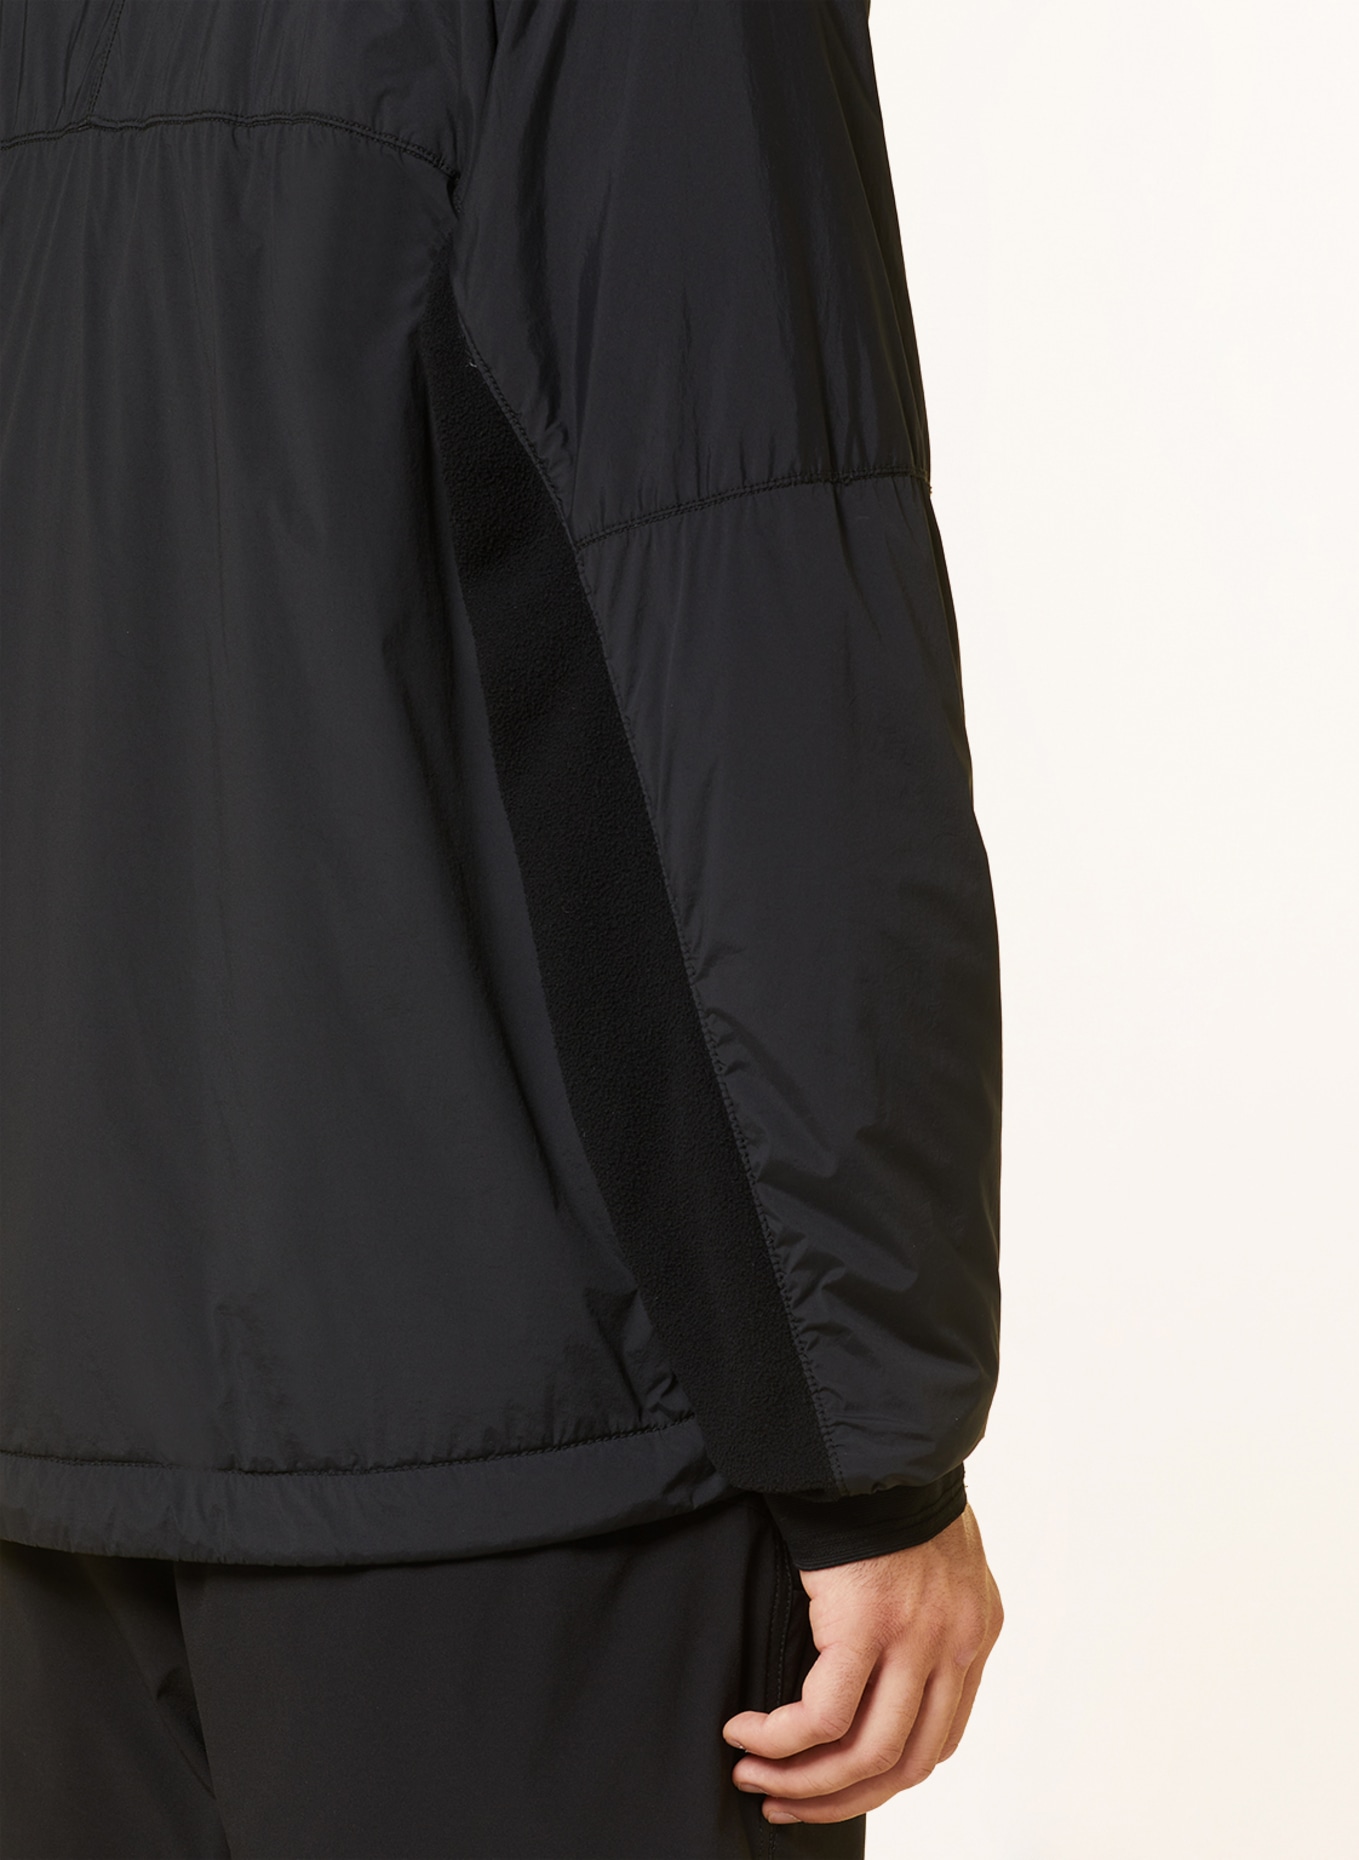 STONE ISLAND Jacket STELLINA in mixed materials, Color: BLACK (Image 6)